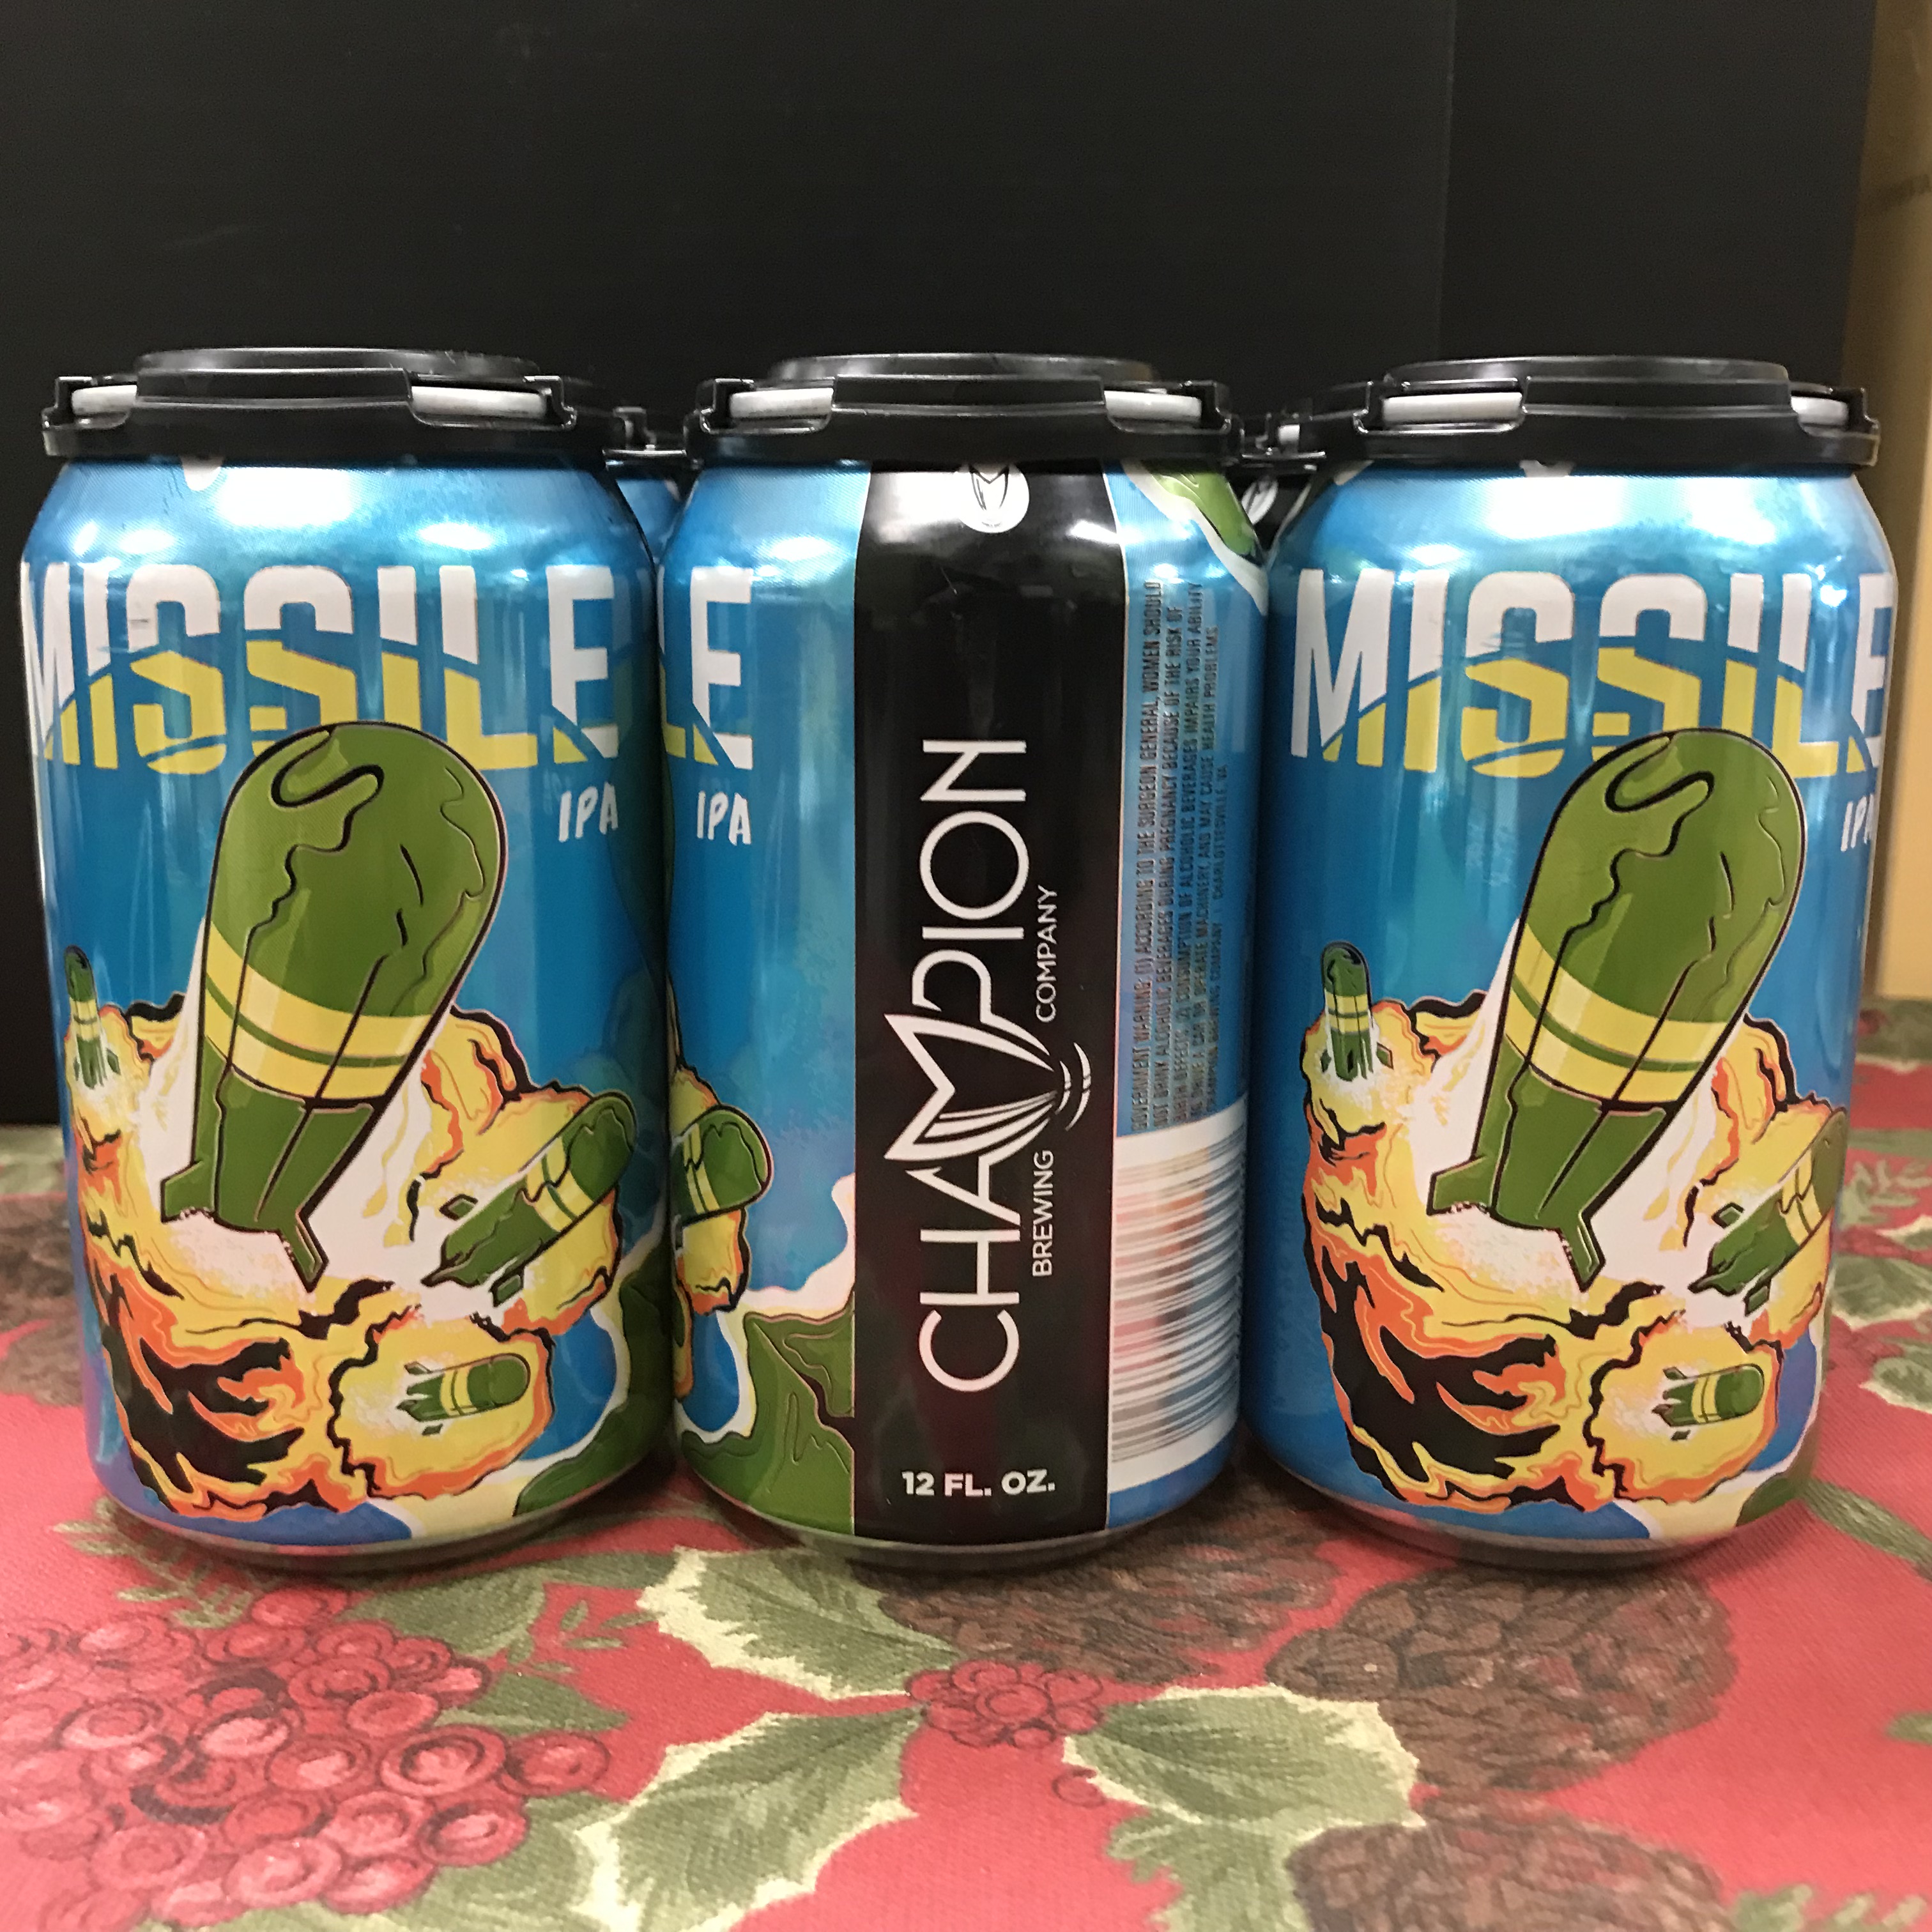 Champion Missle IPA 6 x 12oz cans